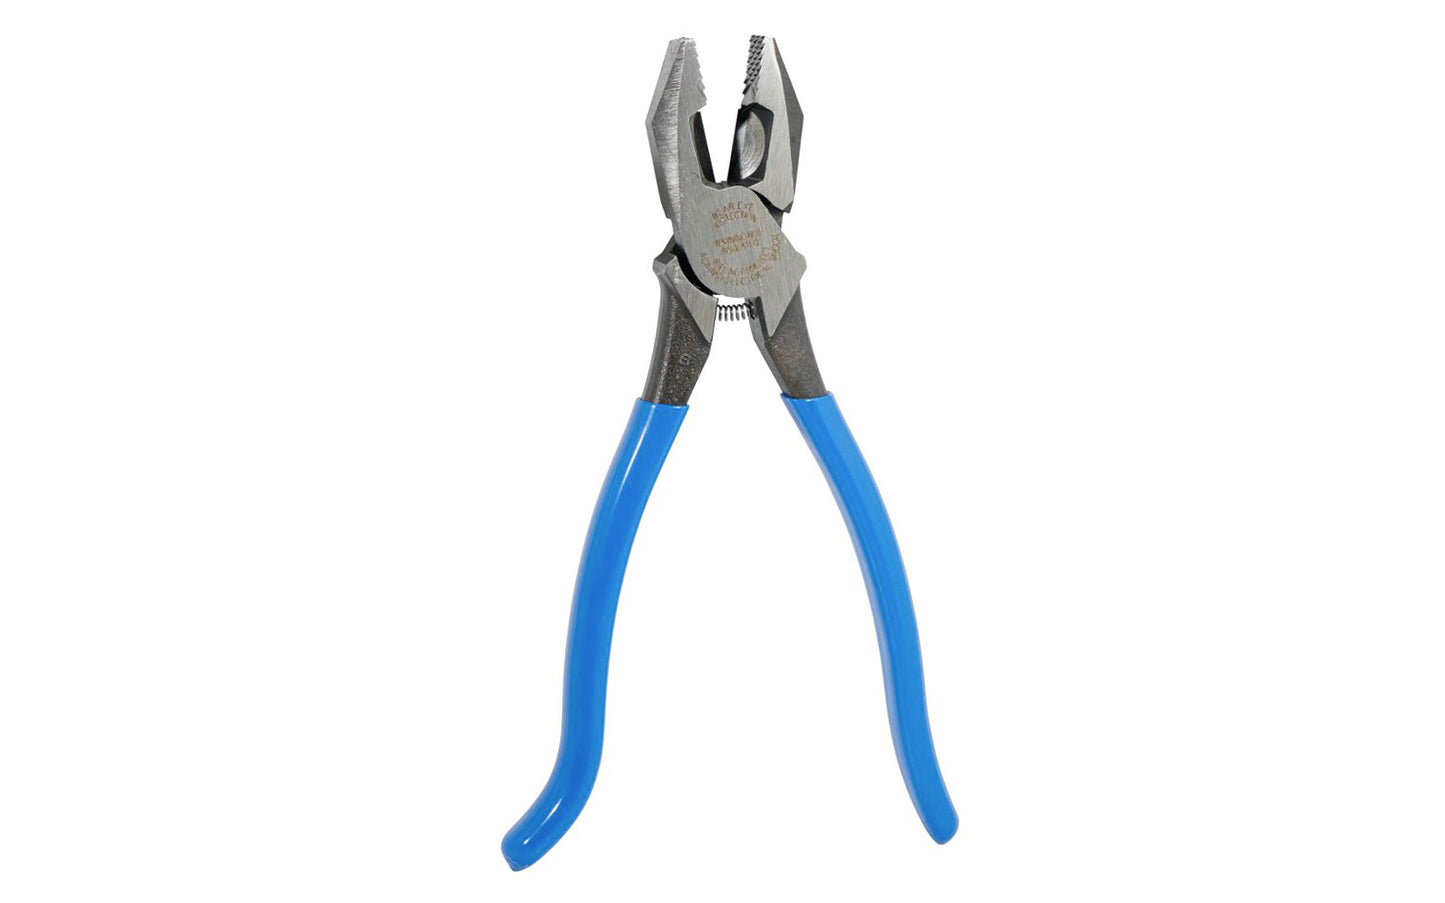 Klein Tools 9-1/4" Ironworker's Pliers "Heavy Duty" D2000-9ST cuts ACSR, screws, nails & most hardened wire. It can twist & cut soft annealed rebar tie wire as well. It has a high-leverage design; rivet is closer to the cutting edge for 46-Percent greater cutting & gripping power. 9-1/4" overall length. 092644703829